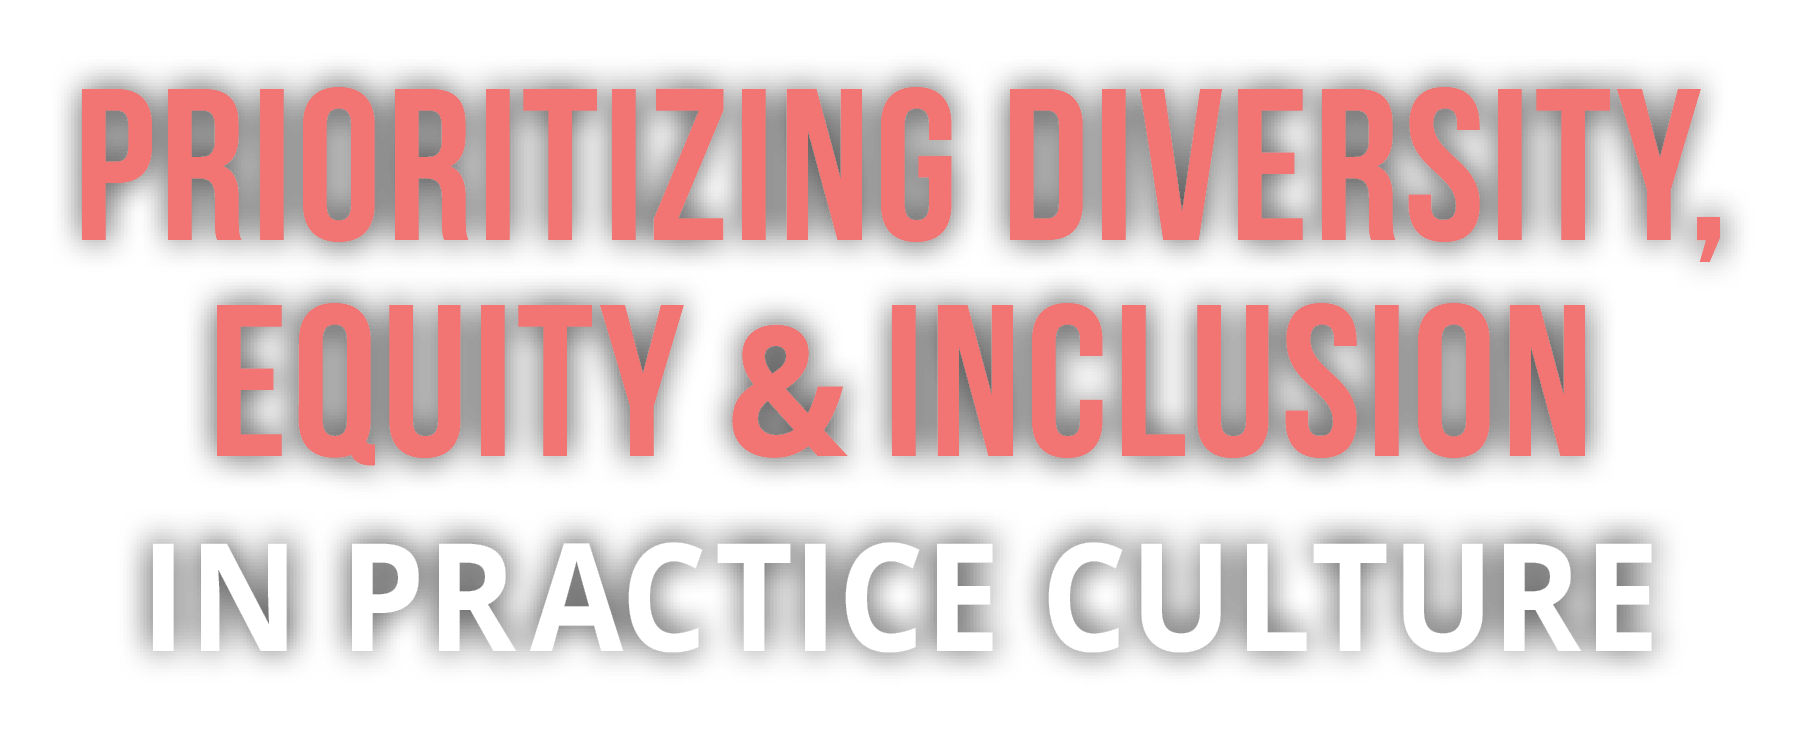 Prioritizing Diversity, Equity and Inclusion in Practice Culture